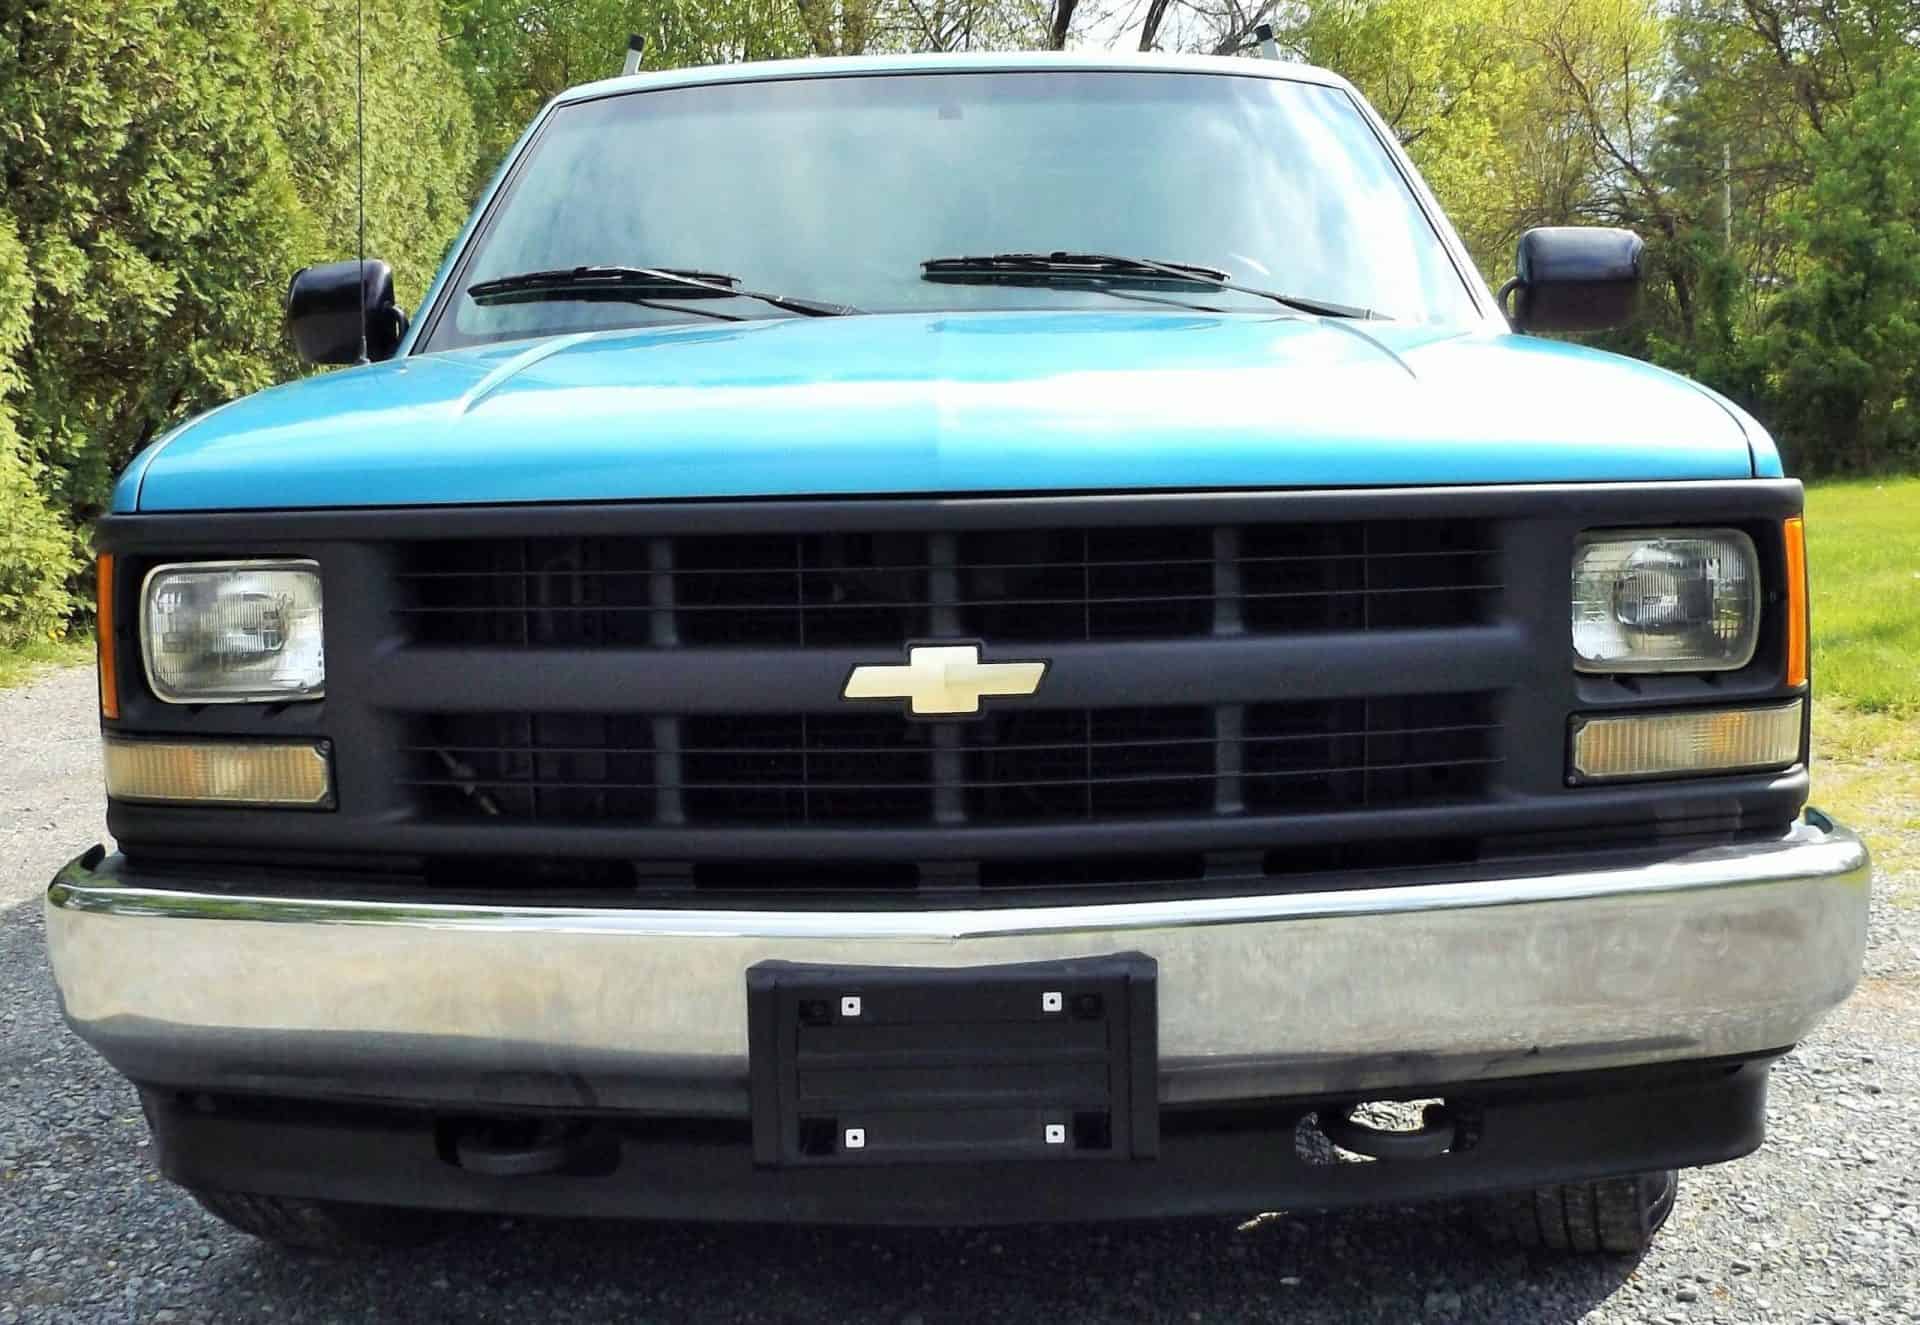 Stock lights are nowhere near as strong as the best 1998 Chevy Silverado LED Headlights.